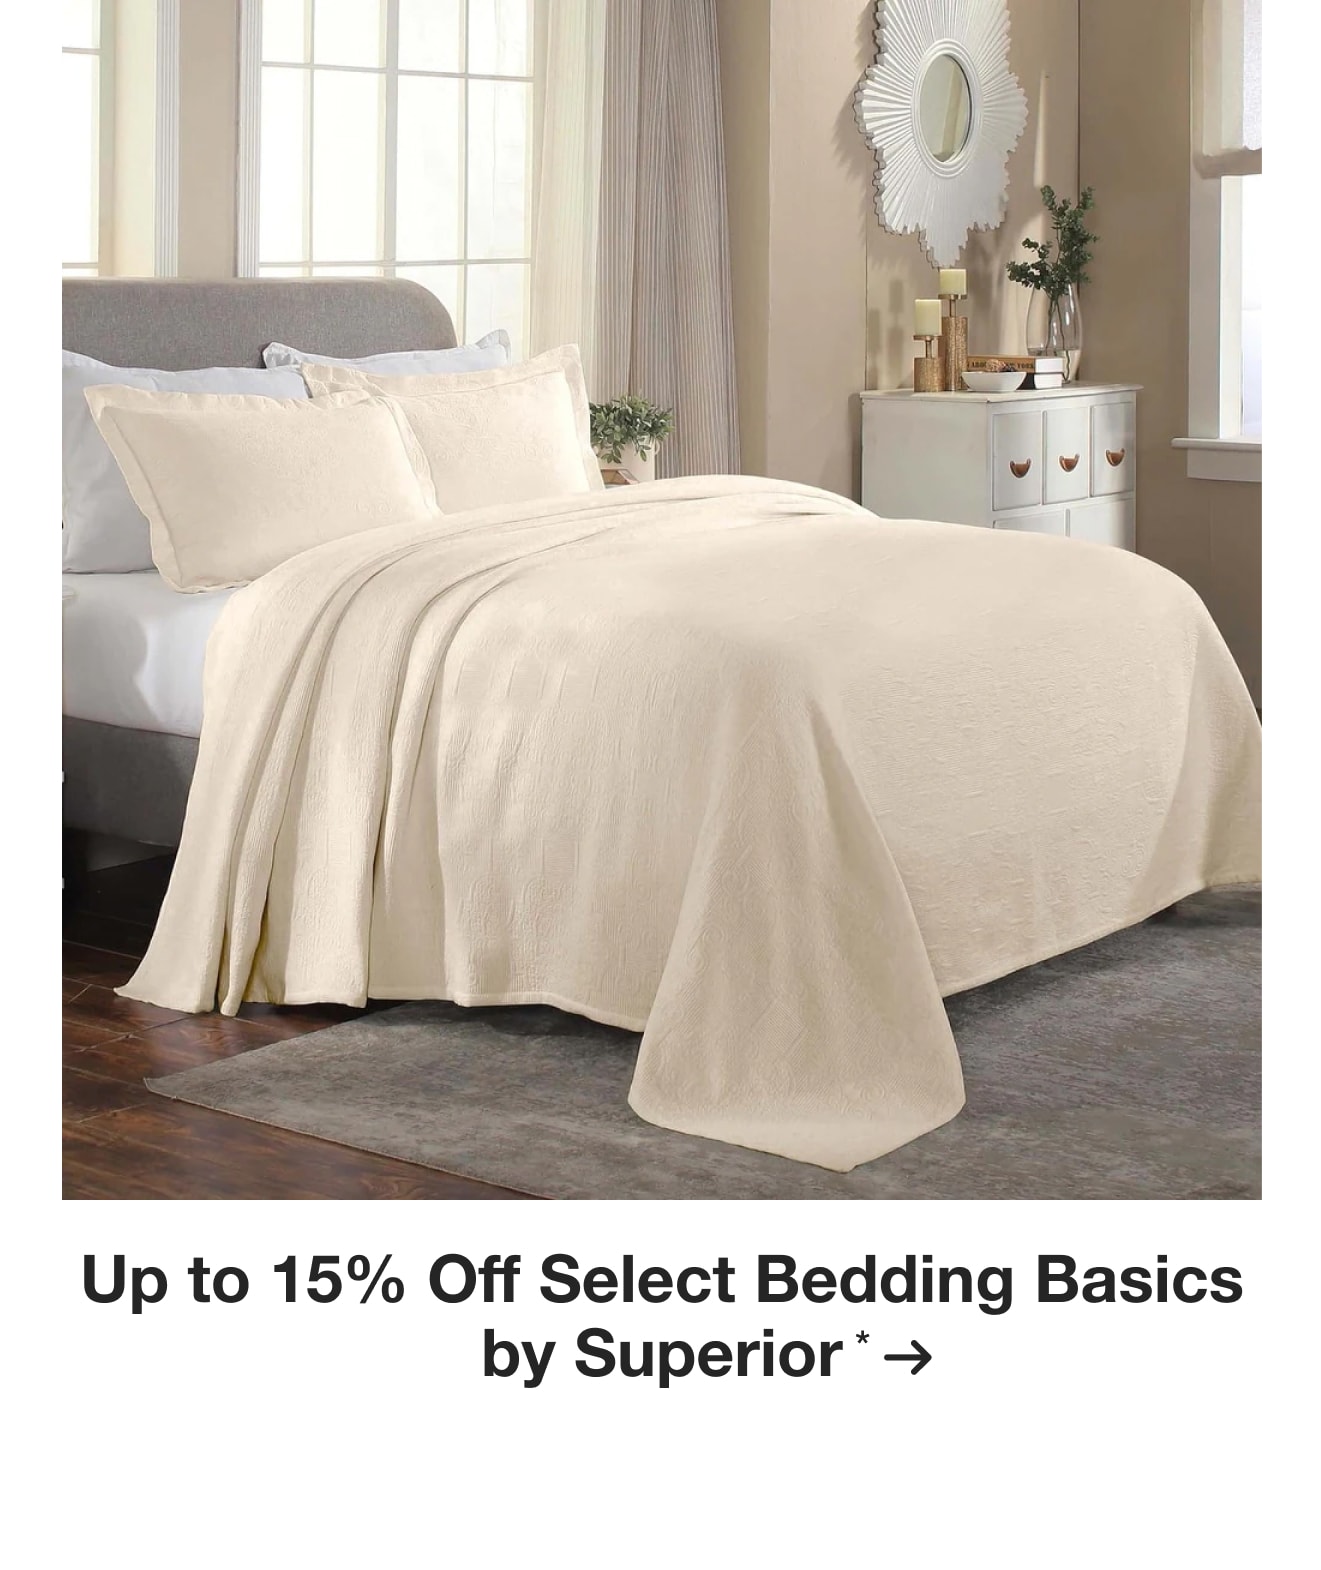 Up to 15% Off Select Bedding by Superior*